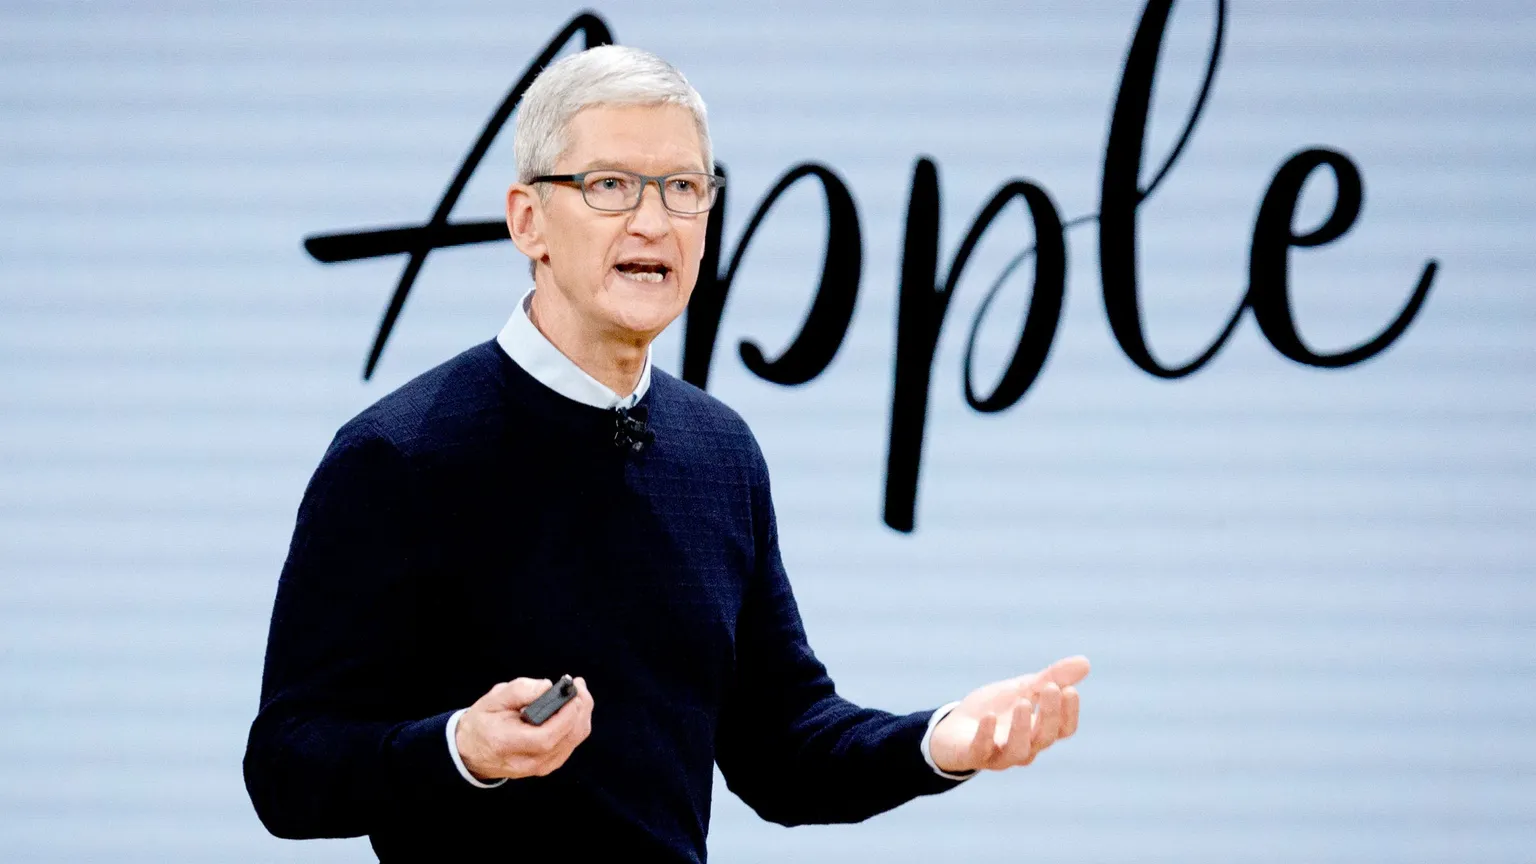 Tim Cook has been the chief executive officer of Apple Inc. since 2011. Image: John Gress/Shutterstock